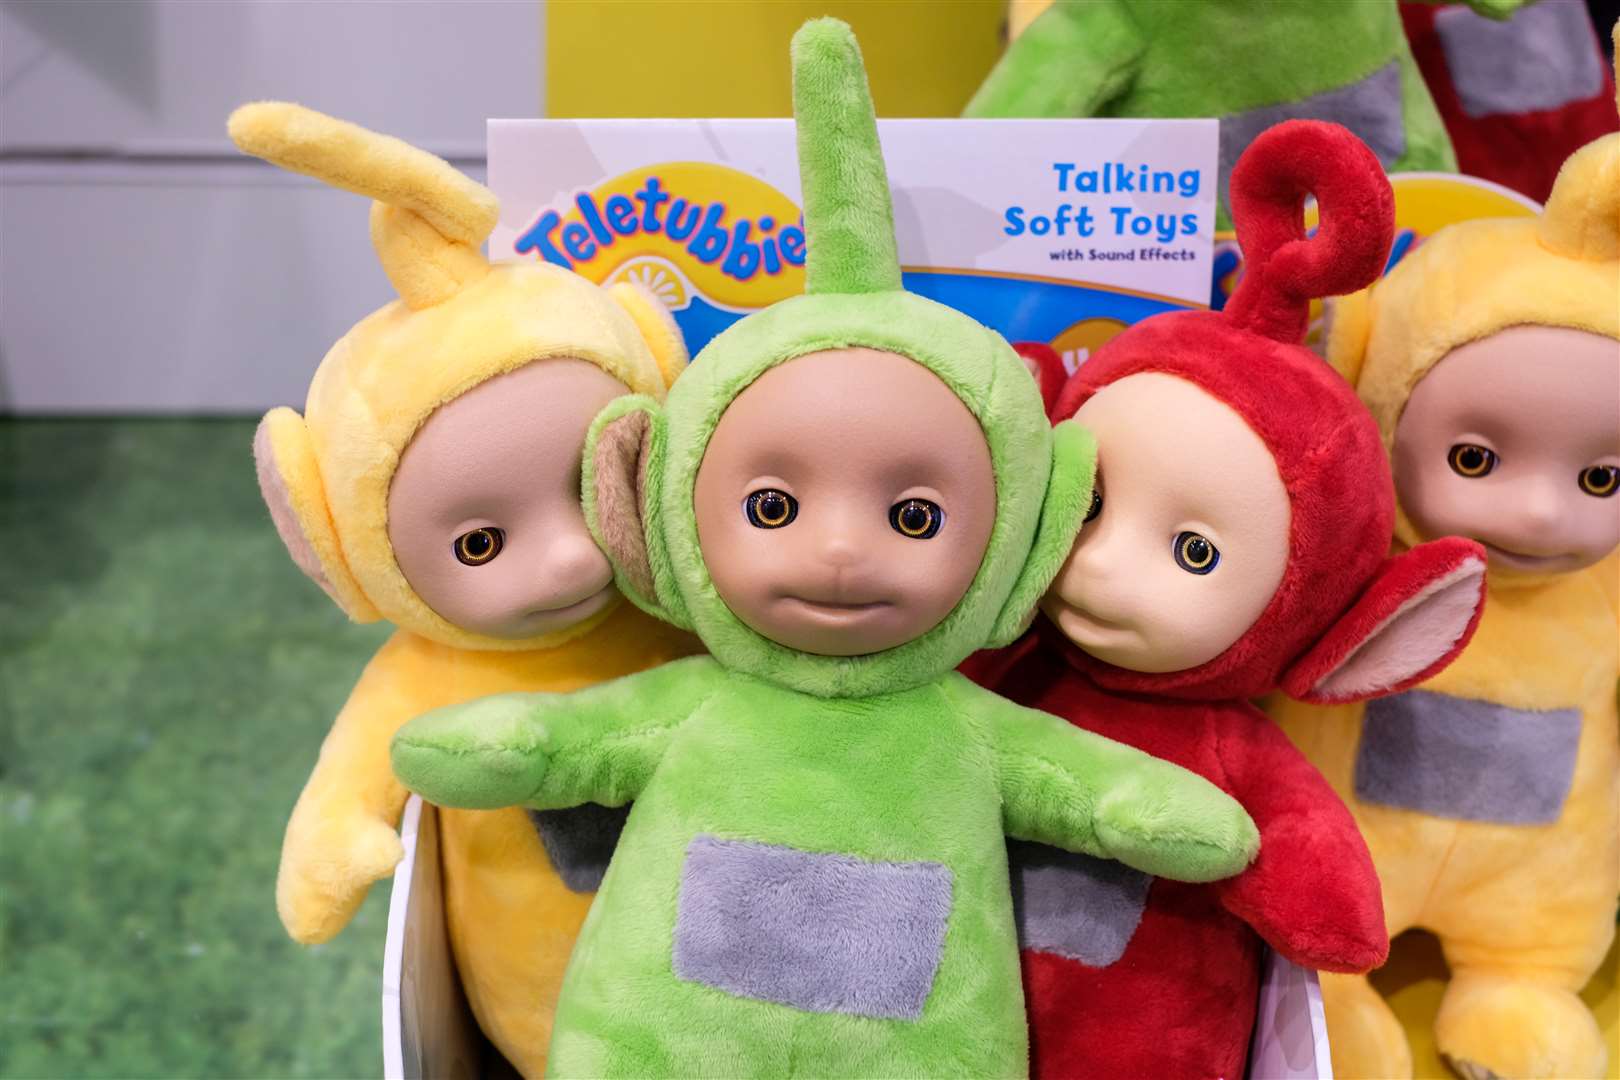 The Teletubbies are 20 years old this year